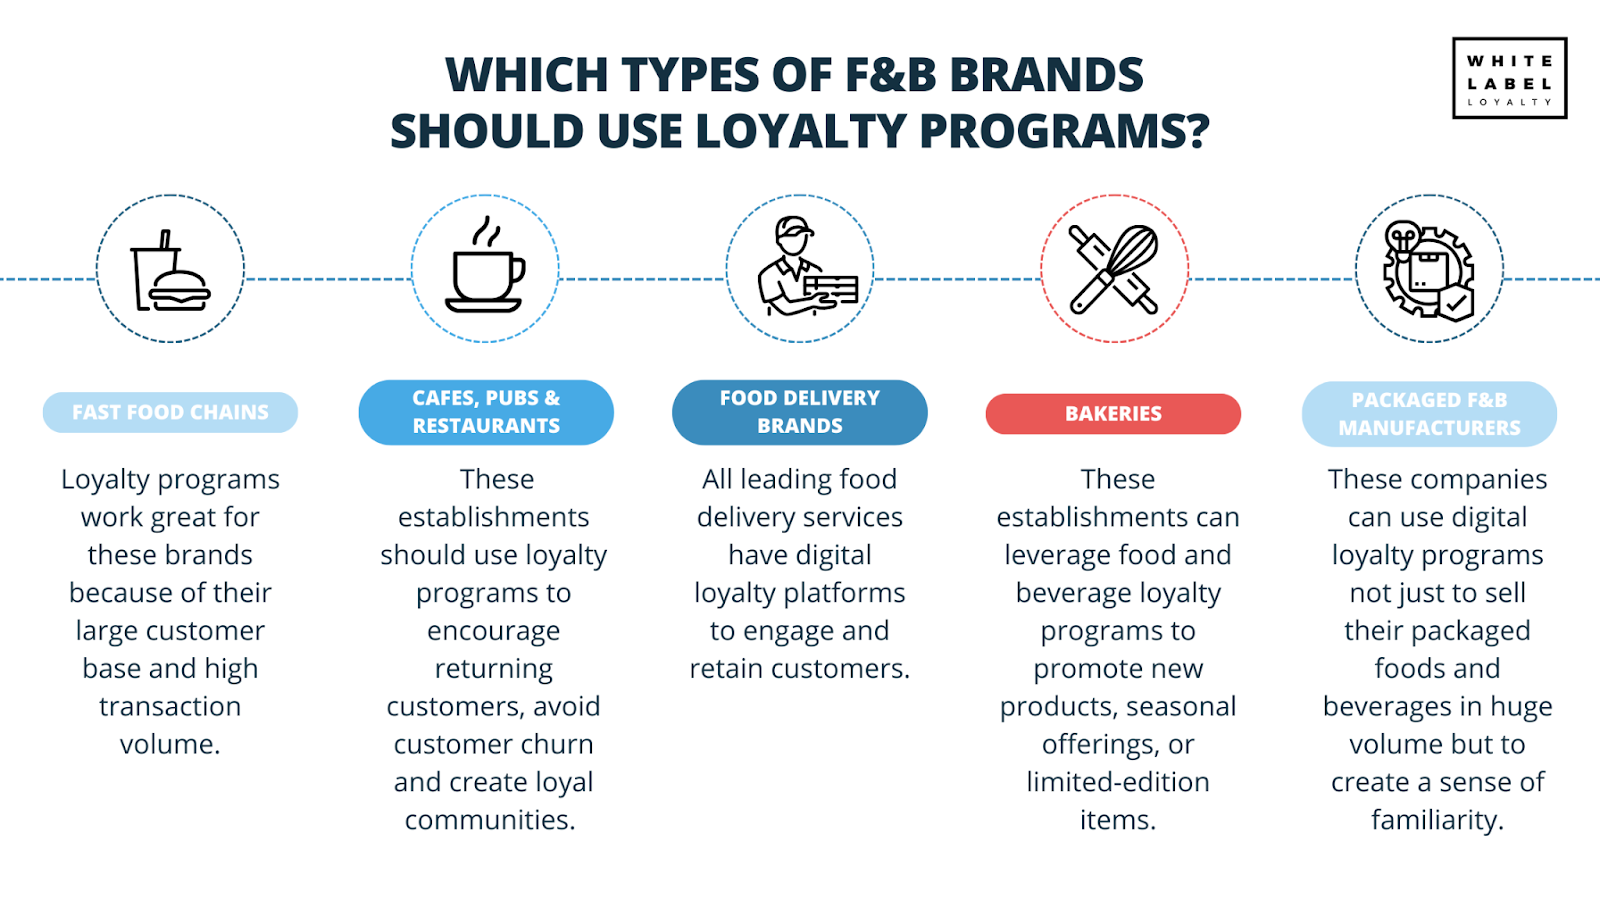 Which types of F&B brands should use loyalty programs?